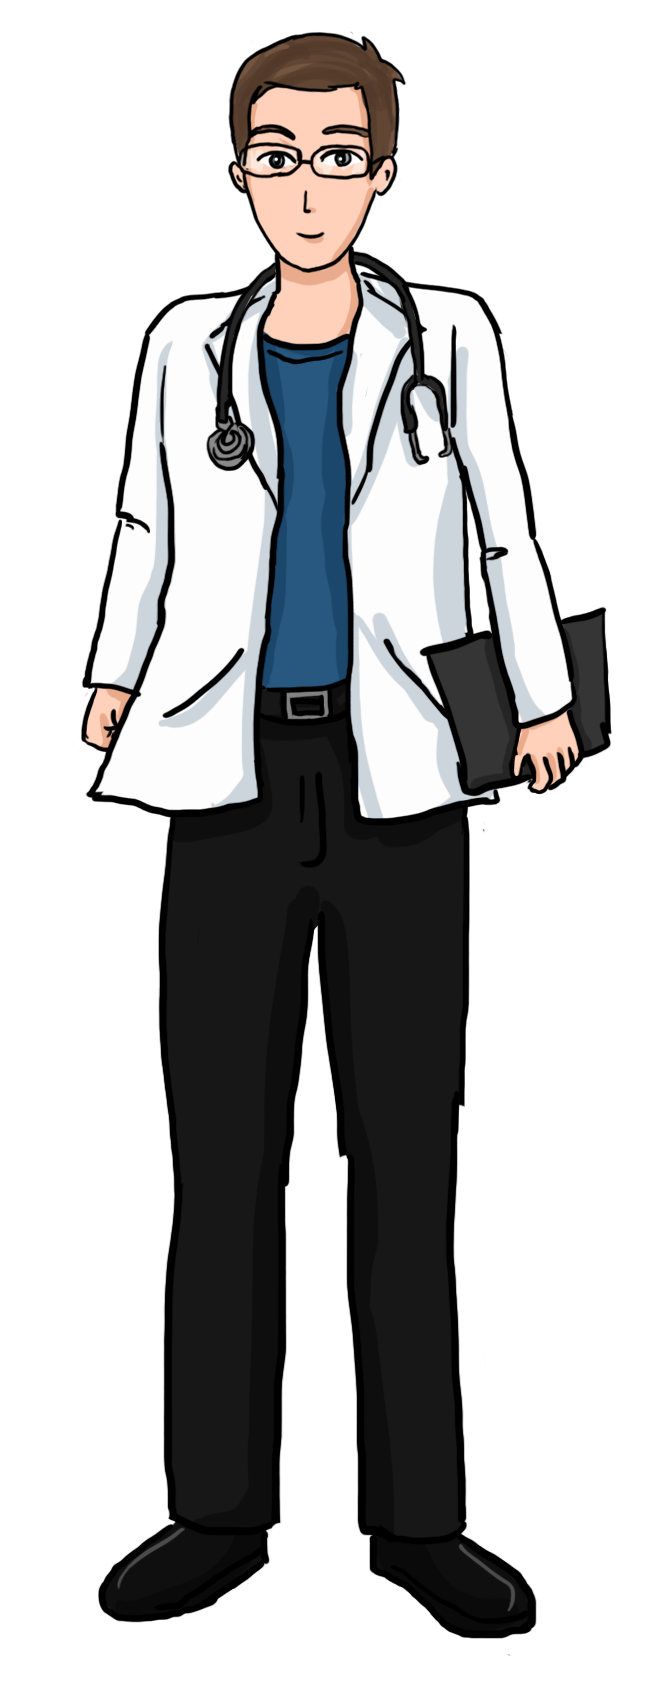 doctor clipart free download - photo #23